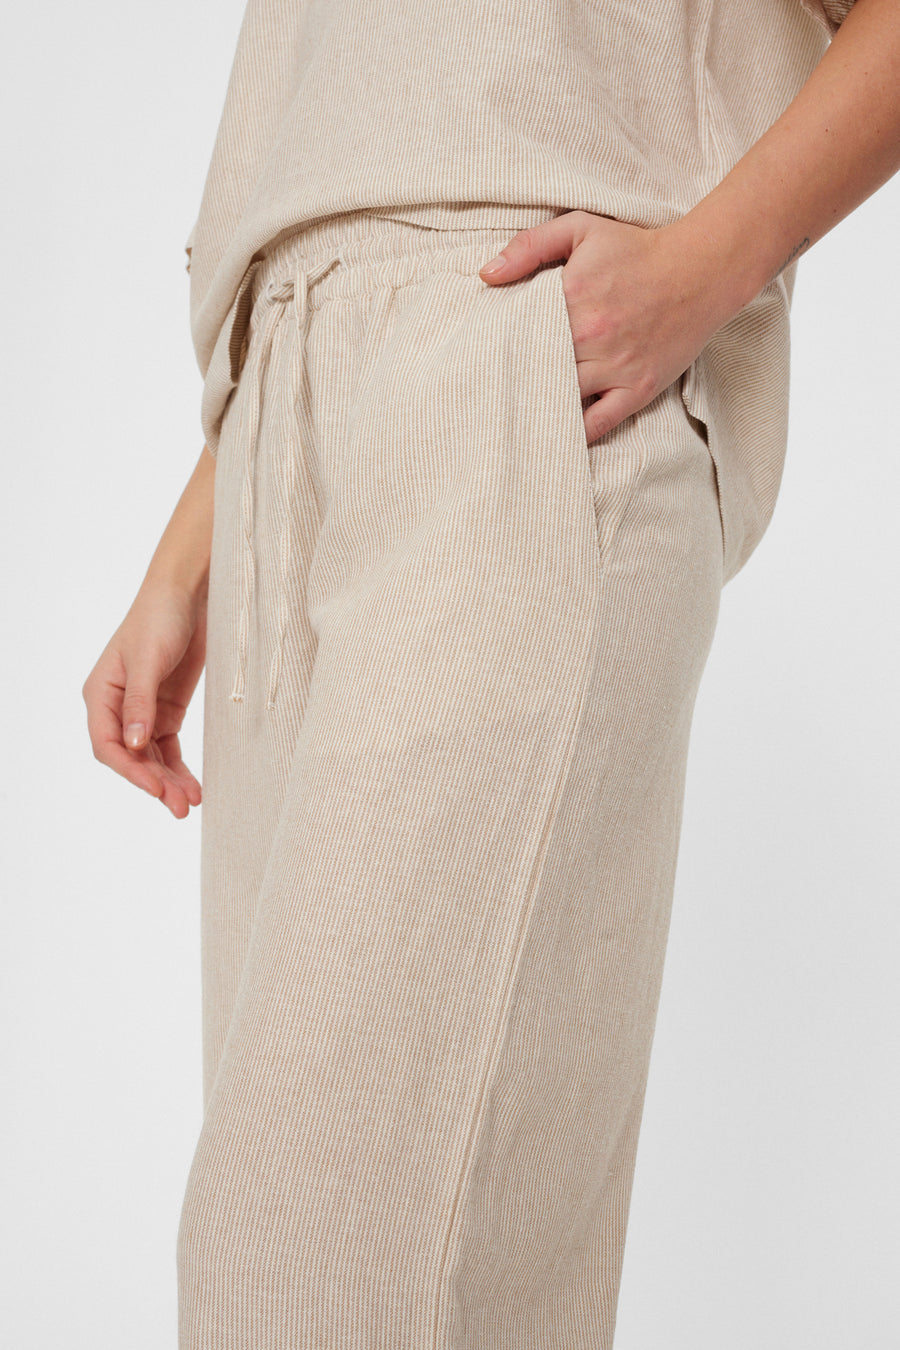 FQLAVA - STRIPED LINEN PANTS - WHITE AND BEIGE